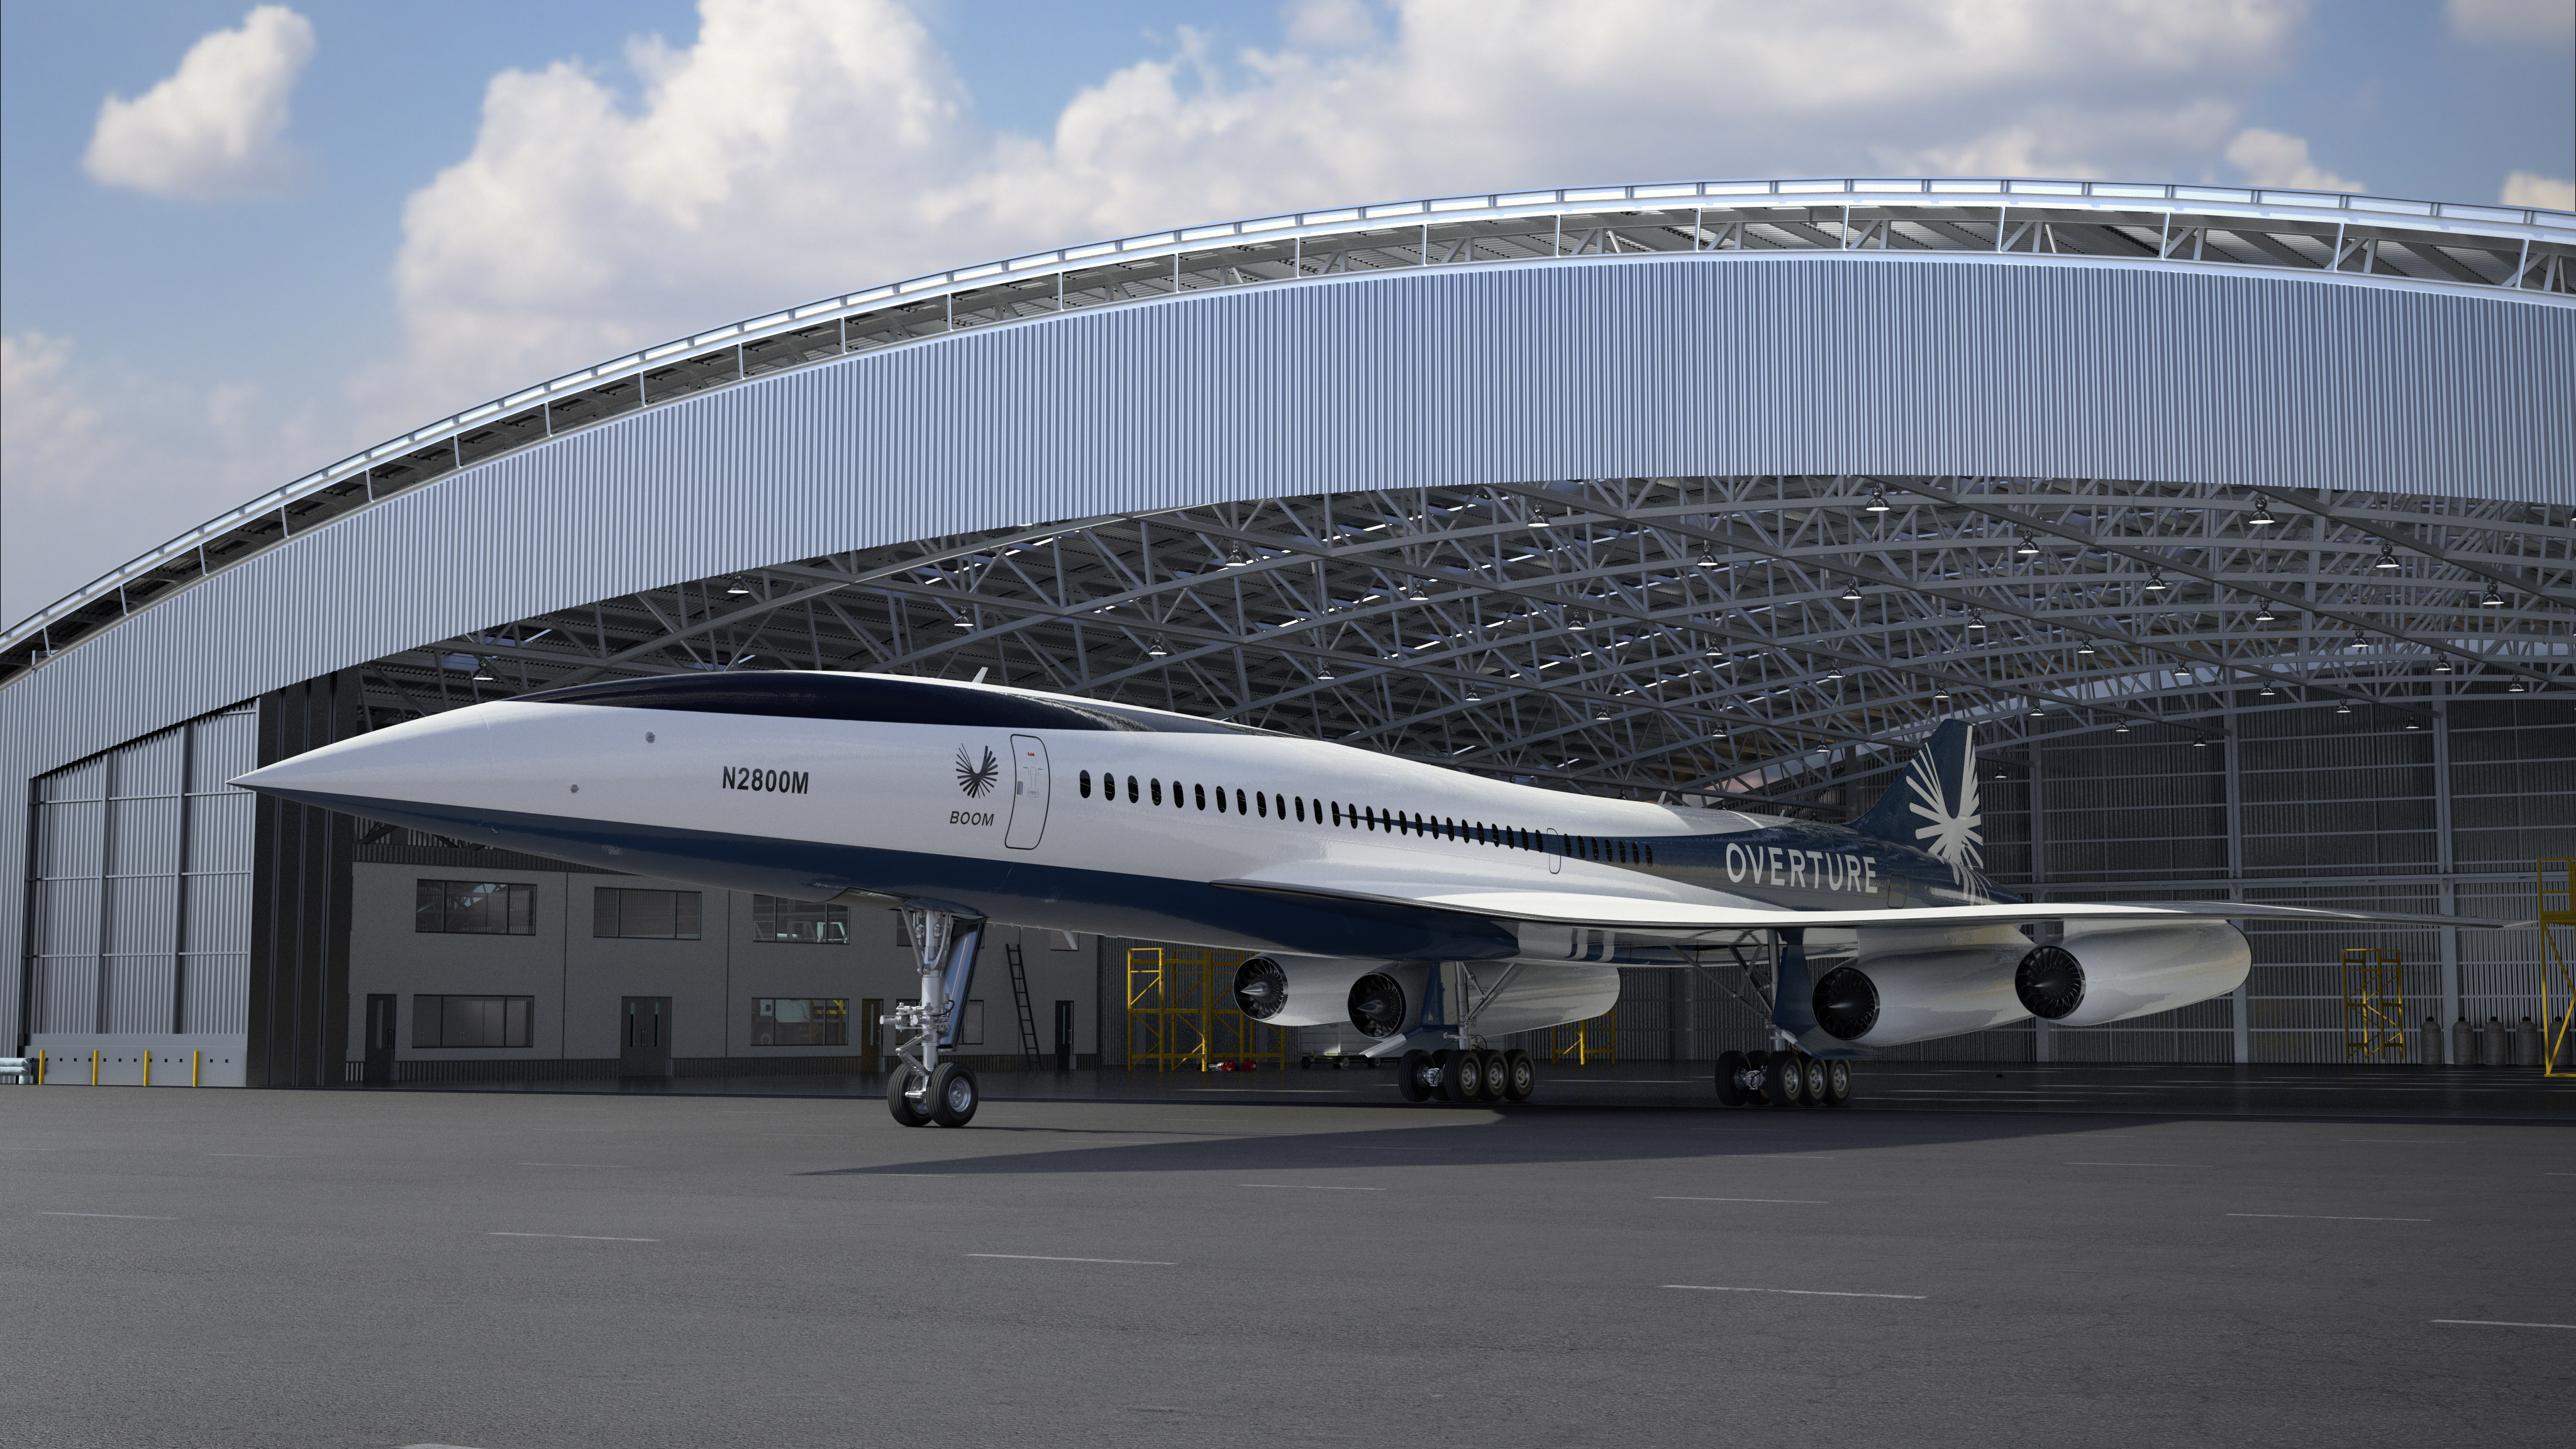 FIA2022: Could Boom Supersonic’s Overture be landing at your airport in 2029?